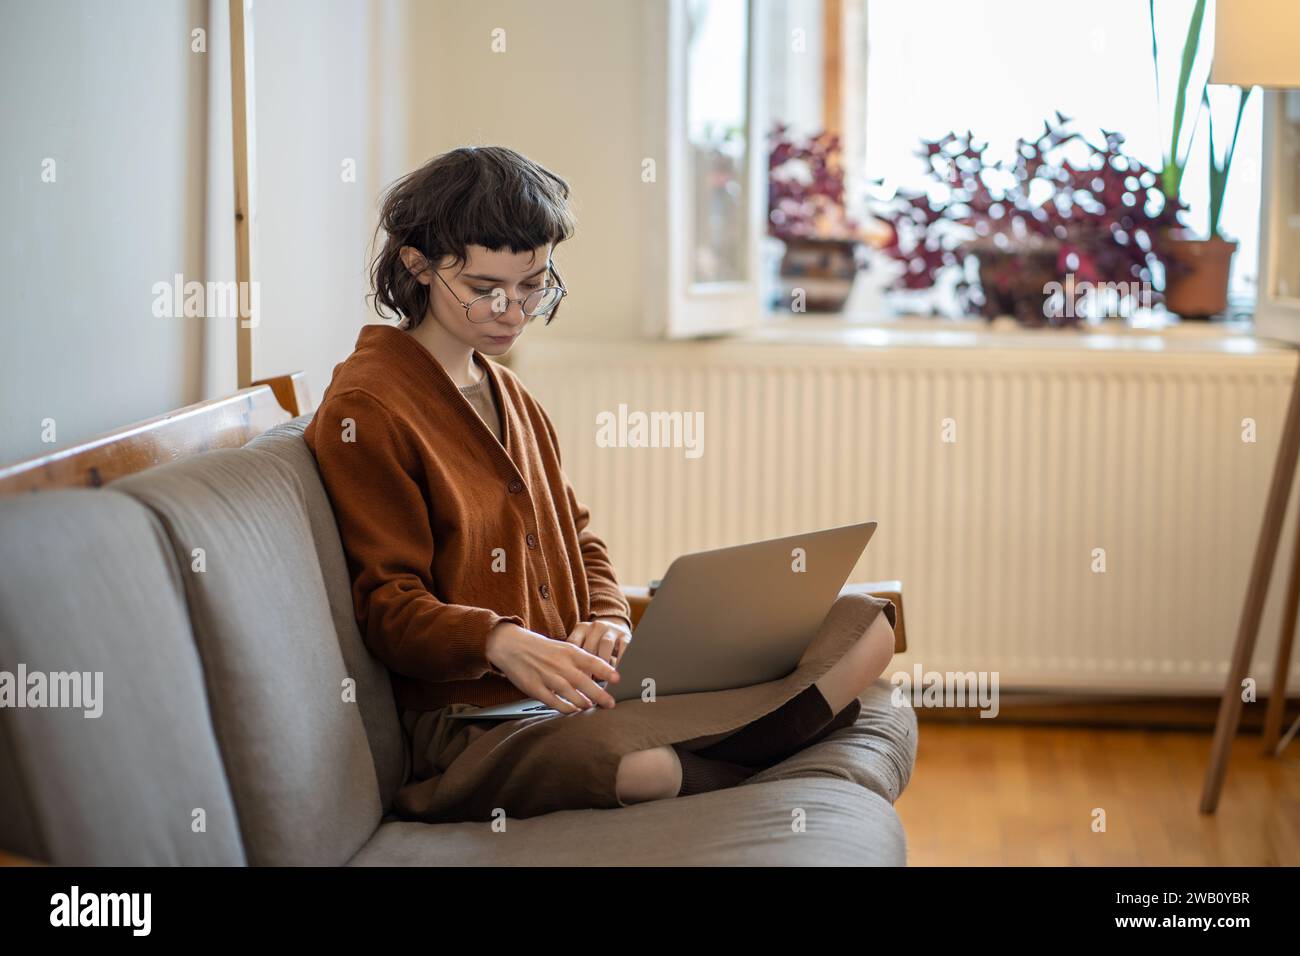 Focused student girl teenager studying on laptop sitting on couch at home. Self-education.  Stock Photo